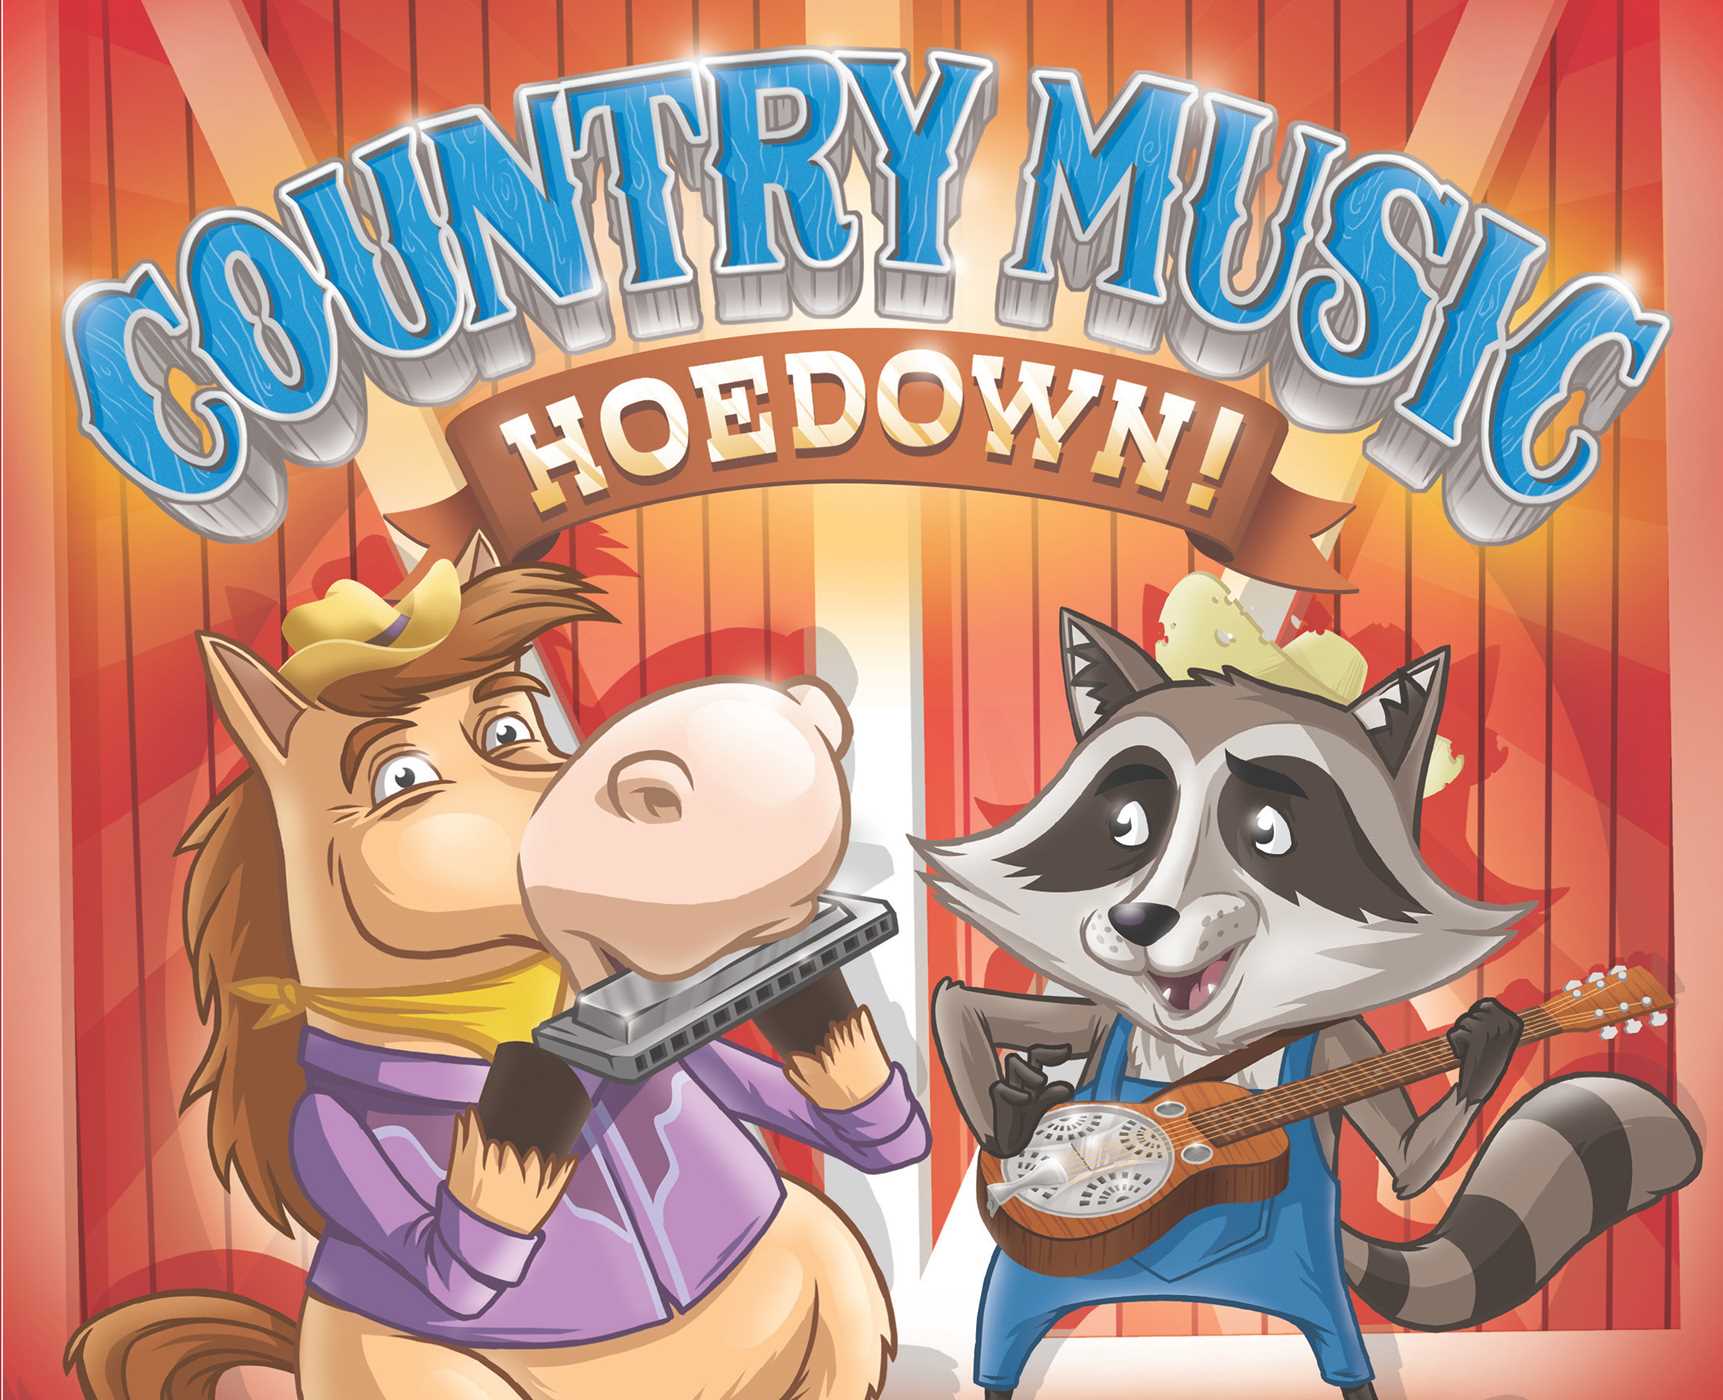 Country Music Hoedown!